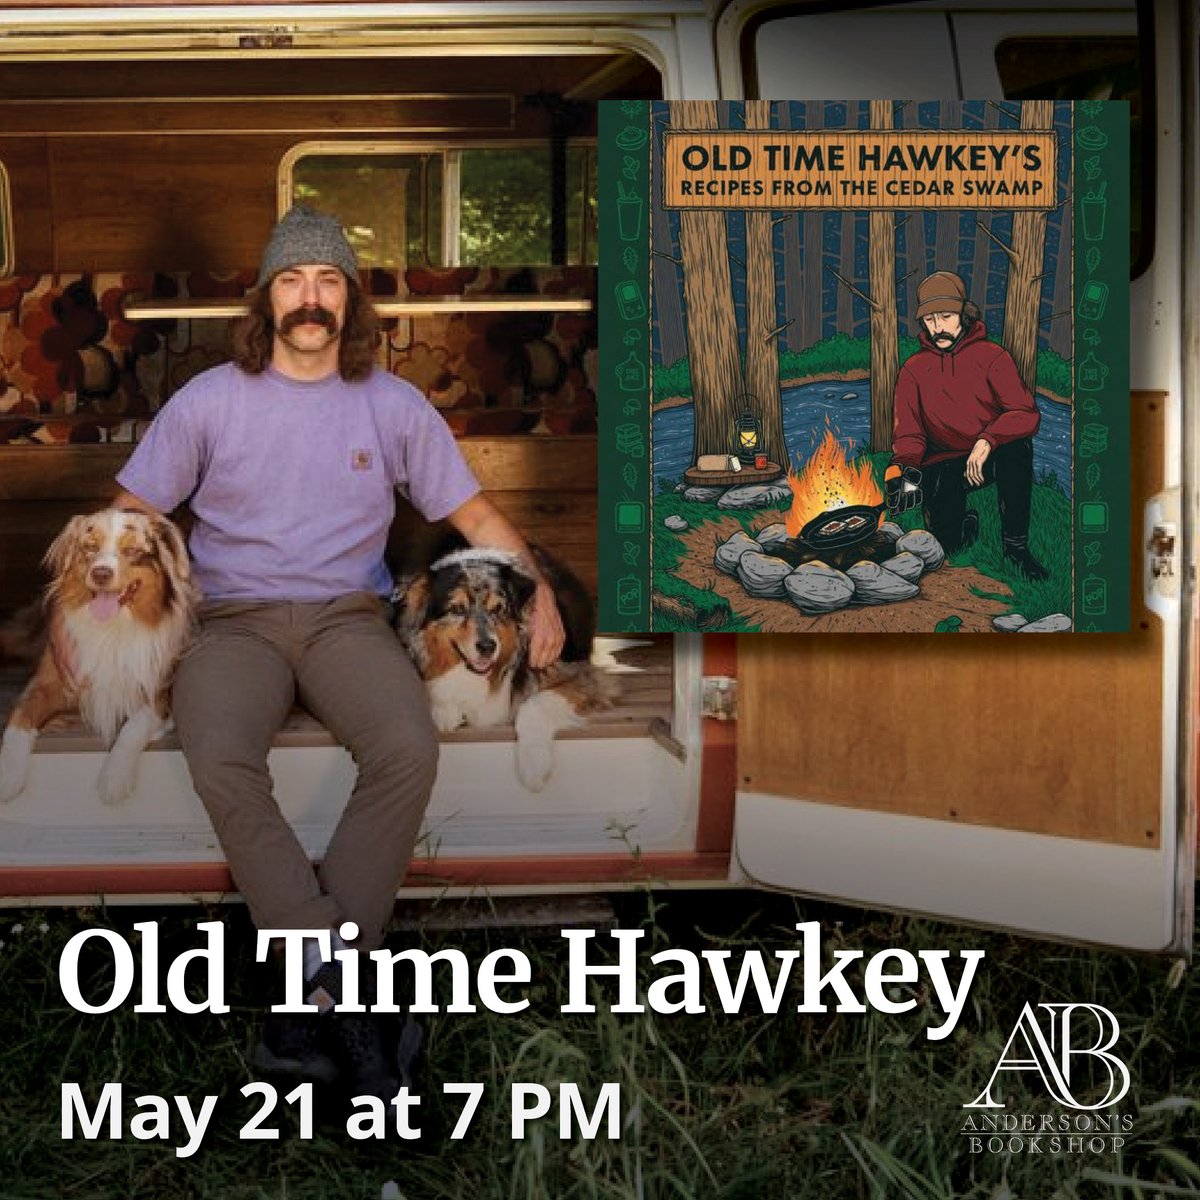 May 21st: JUST ANNOUNCED: We will welcome online creator and superstar @oldtimehawkey to our Naperville store for a photo line! Your ticket includes a pre-signed book, and a chance to meet and take a photo with Old Time Hawkey! TICKETS REQUIRED: OldTimeHawkeyAndersons.eventcombo.com